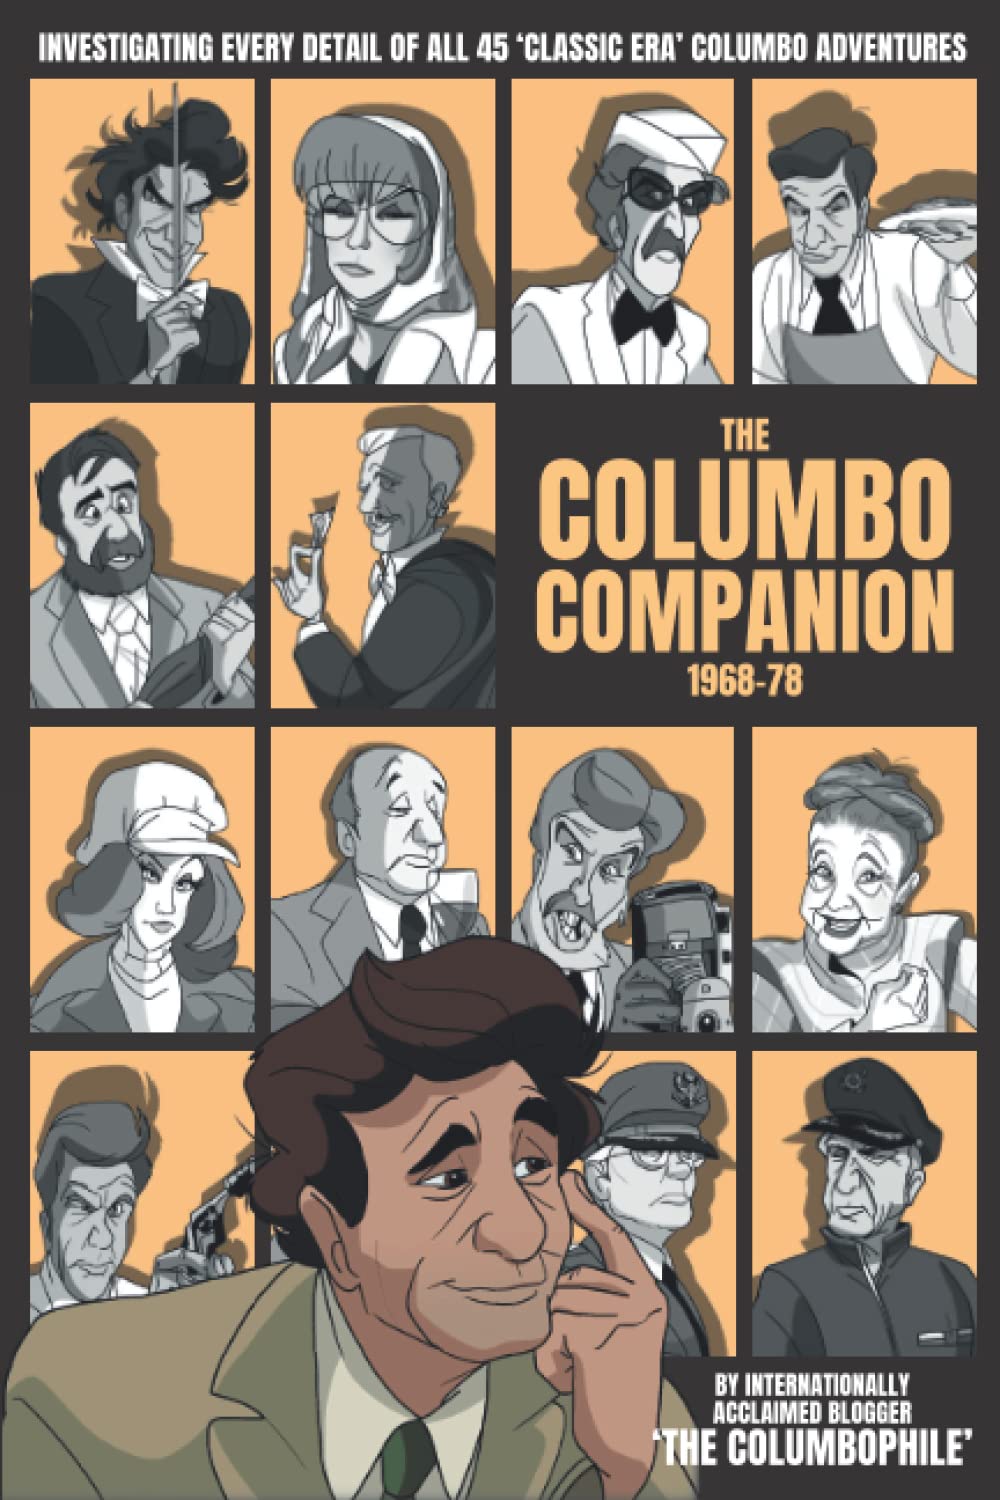 The Columbo Companion 1968–78: Investigating Every Detail of All 45 “Classic Era” Columbo Adventures